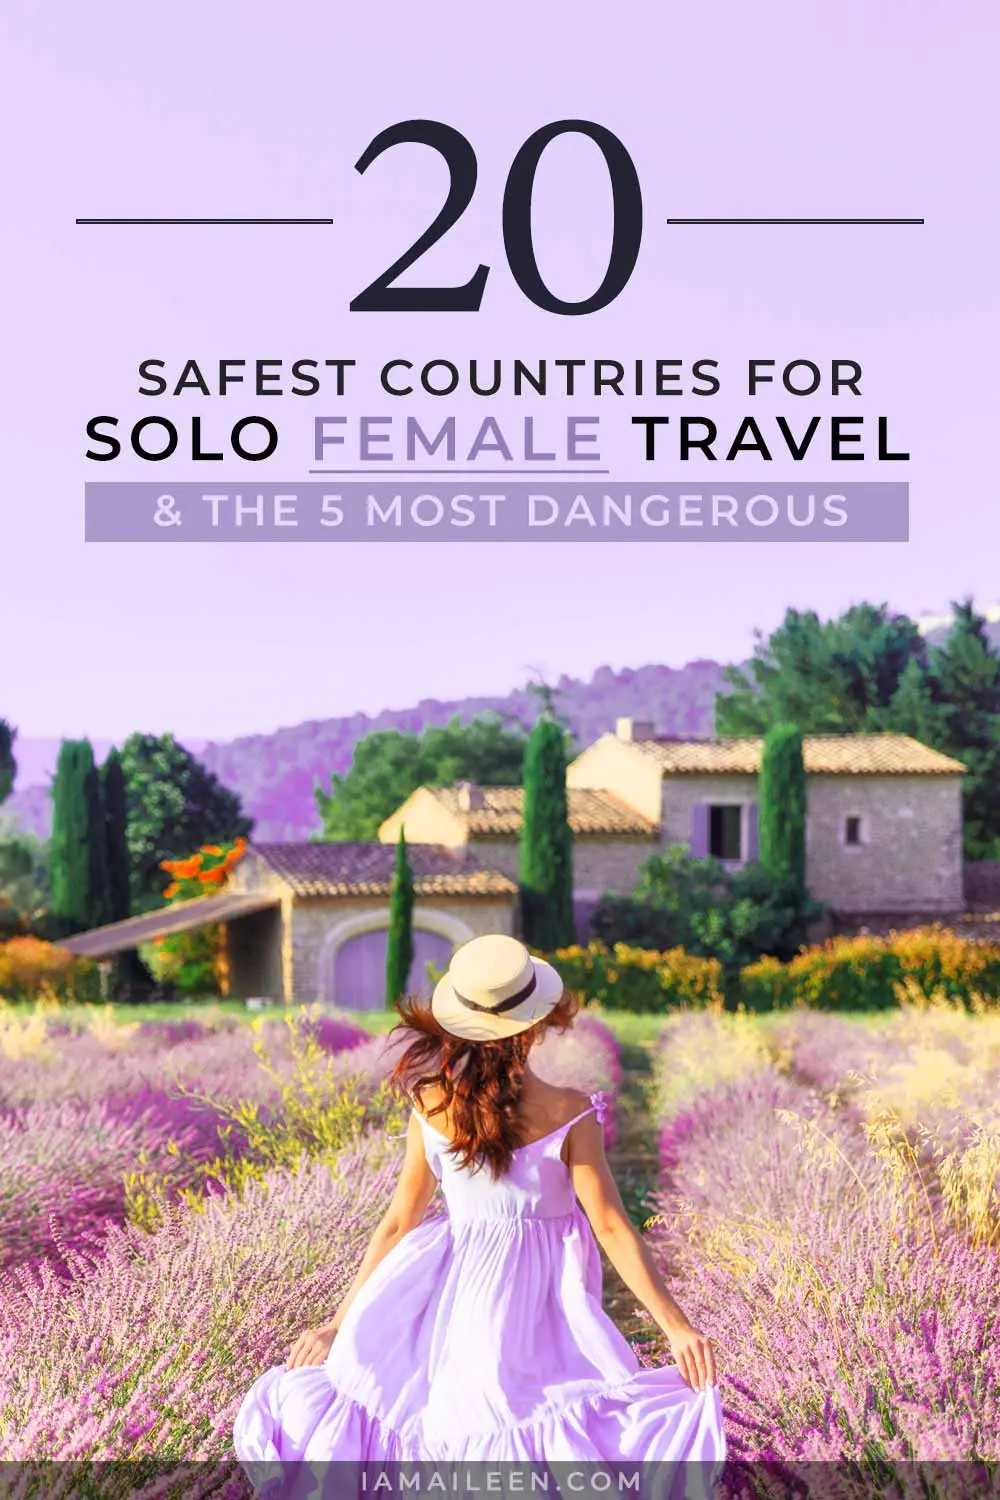 safe places for female solo travellers - Is female solo travelling safe